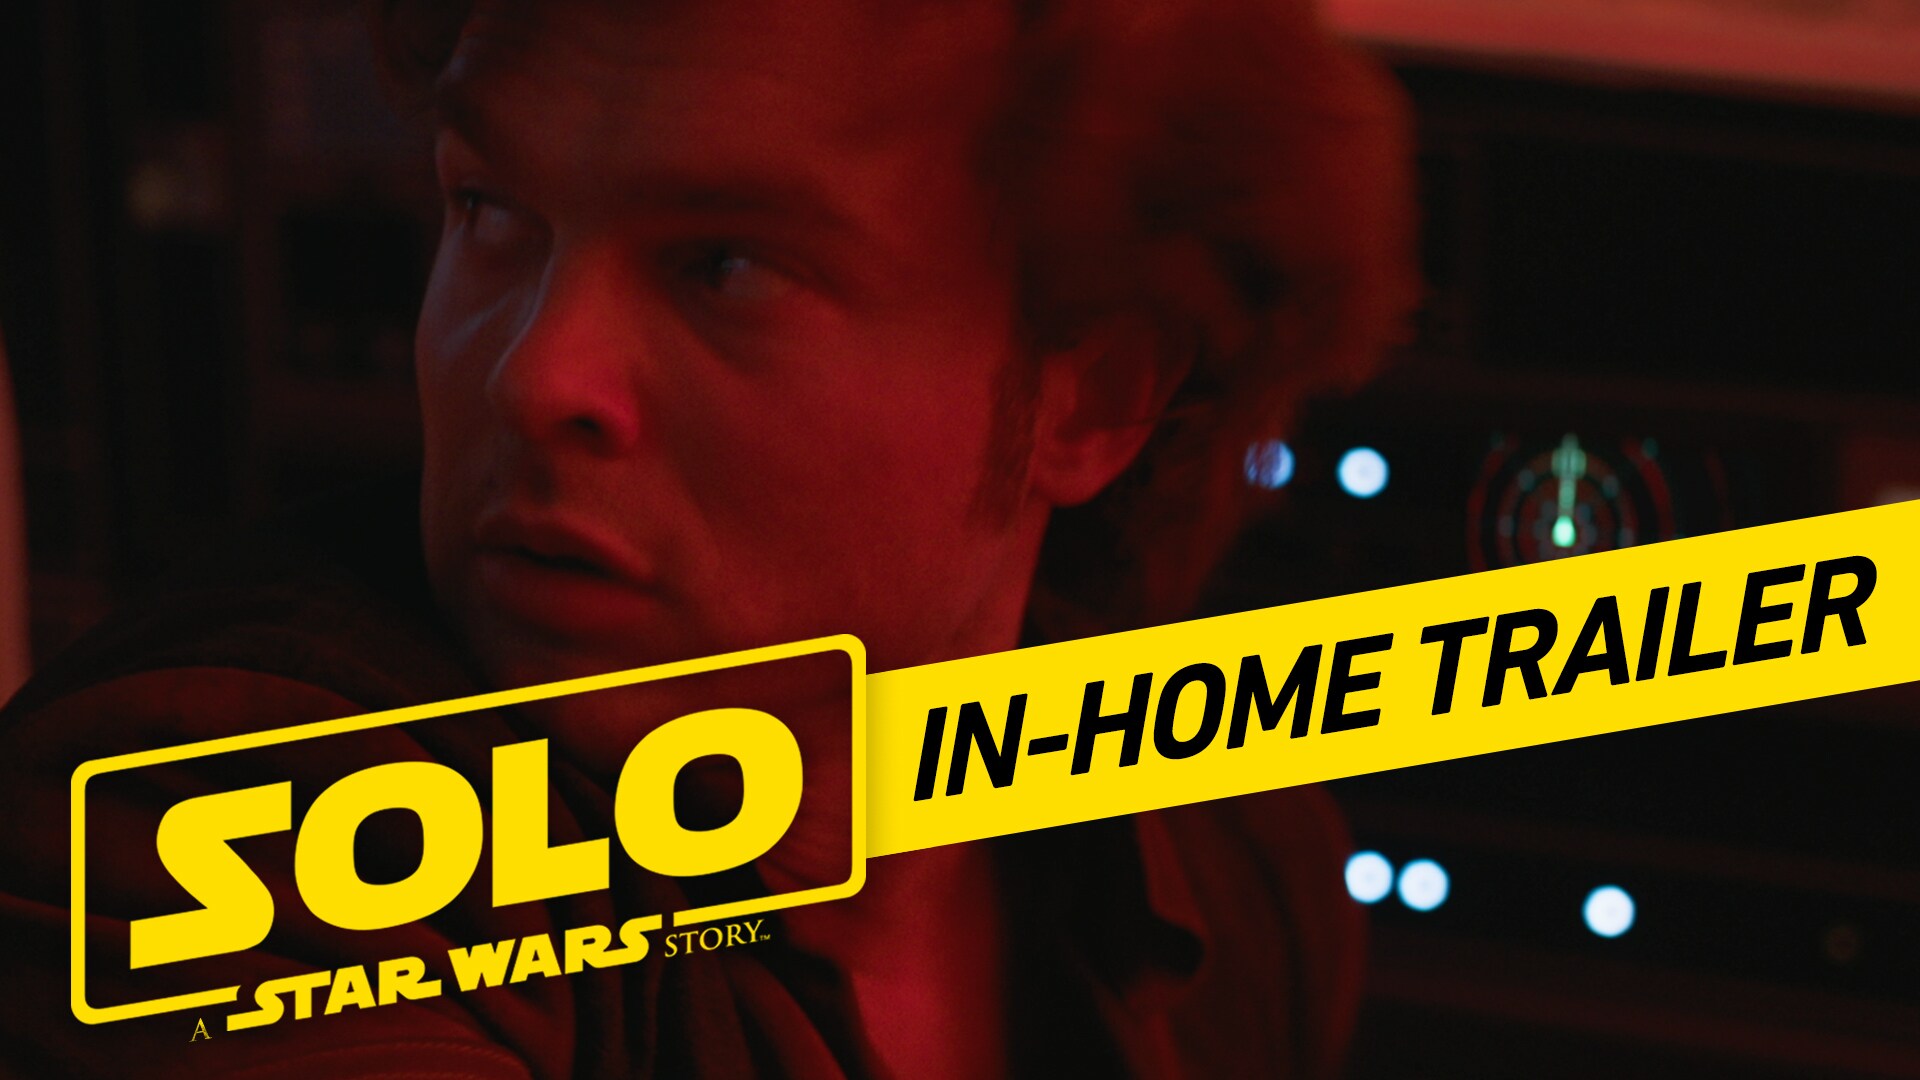 Solo: A Star Wars Story In-Home Trailer (Official)